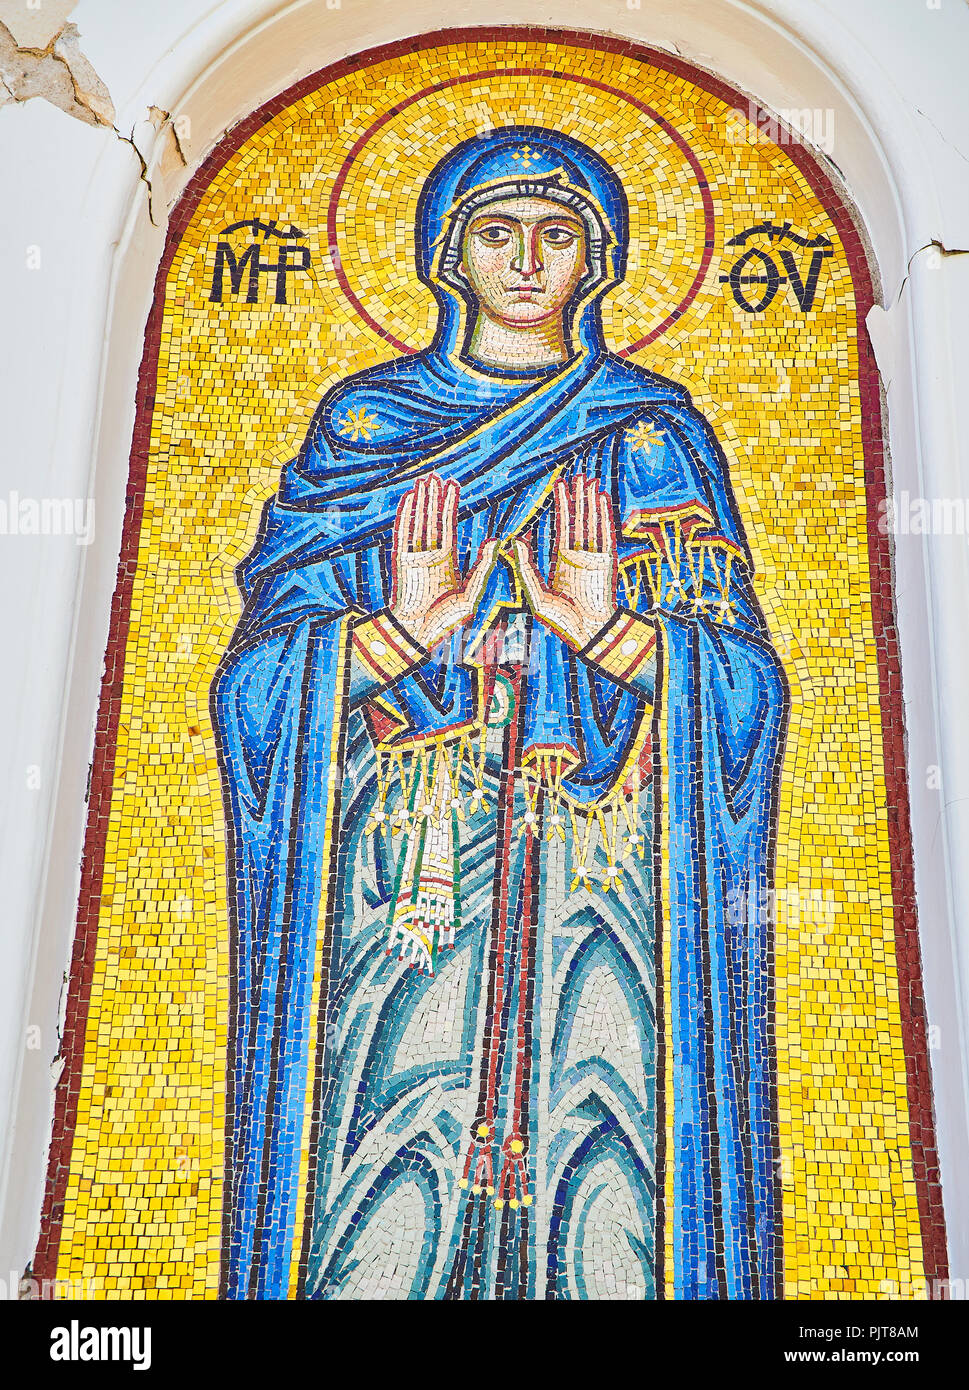 Kos, Greece - July 3, 2018. Byzantine-style mosaics representing Virgin Mary on the principal facade of the Church of Agia Paraskevi. South Aegean. Stock Photo